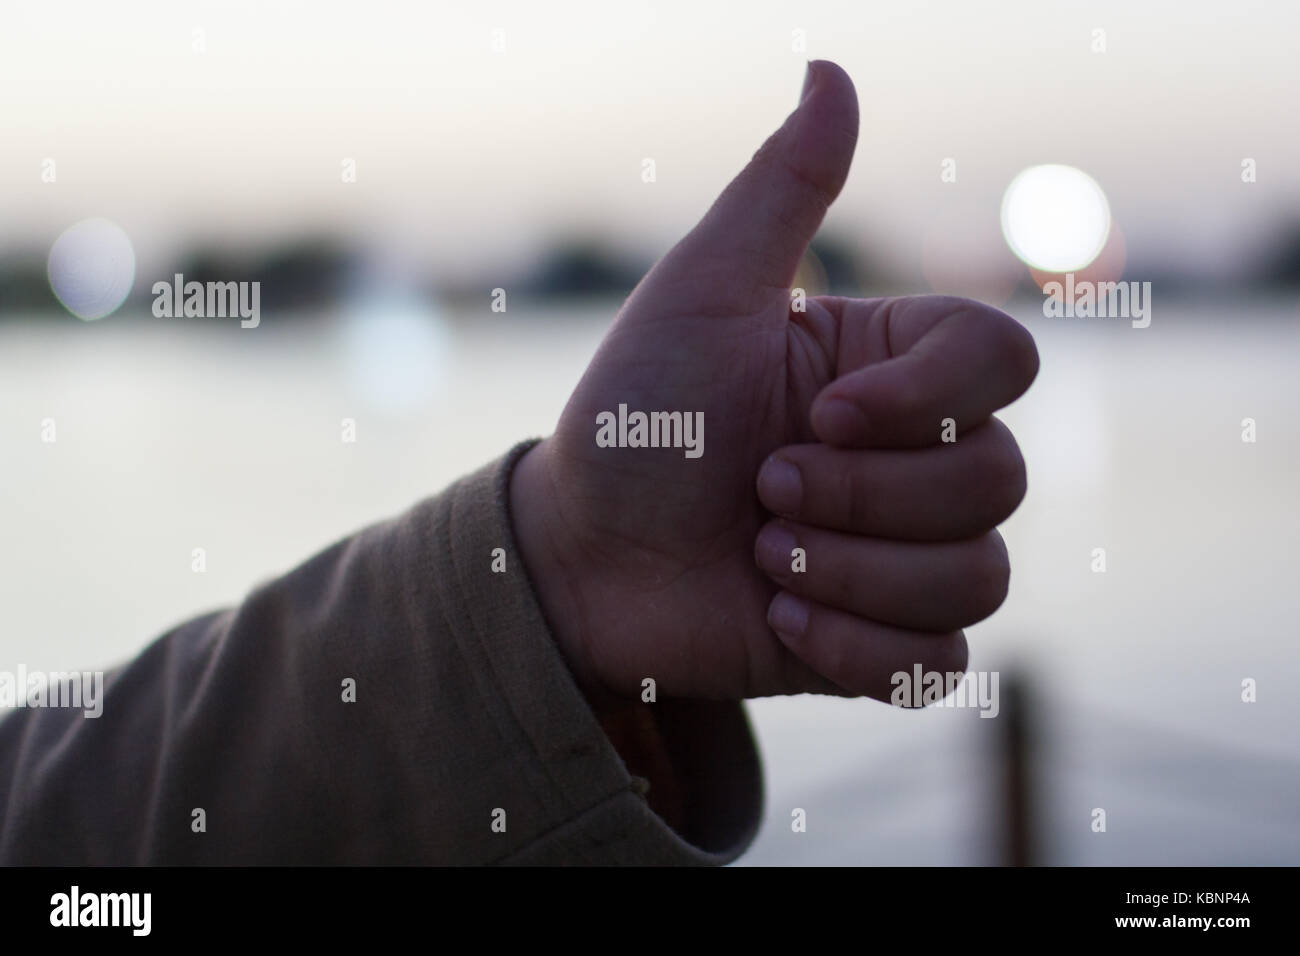 Closeup image of a hand with thumb up in a blurred background Stock Photo